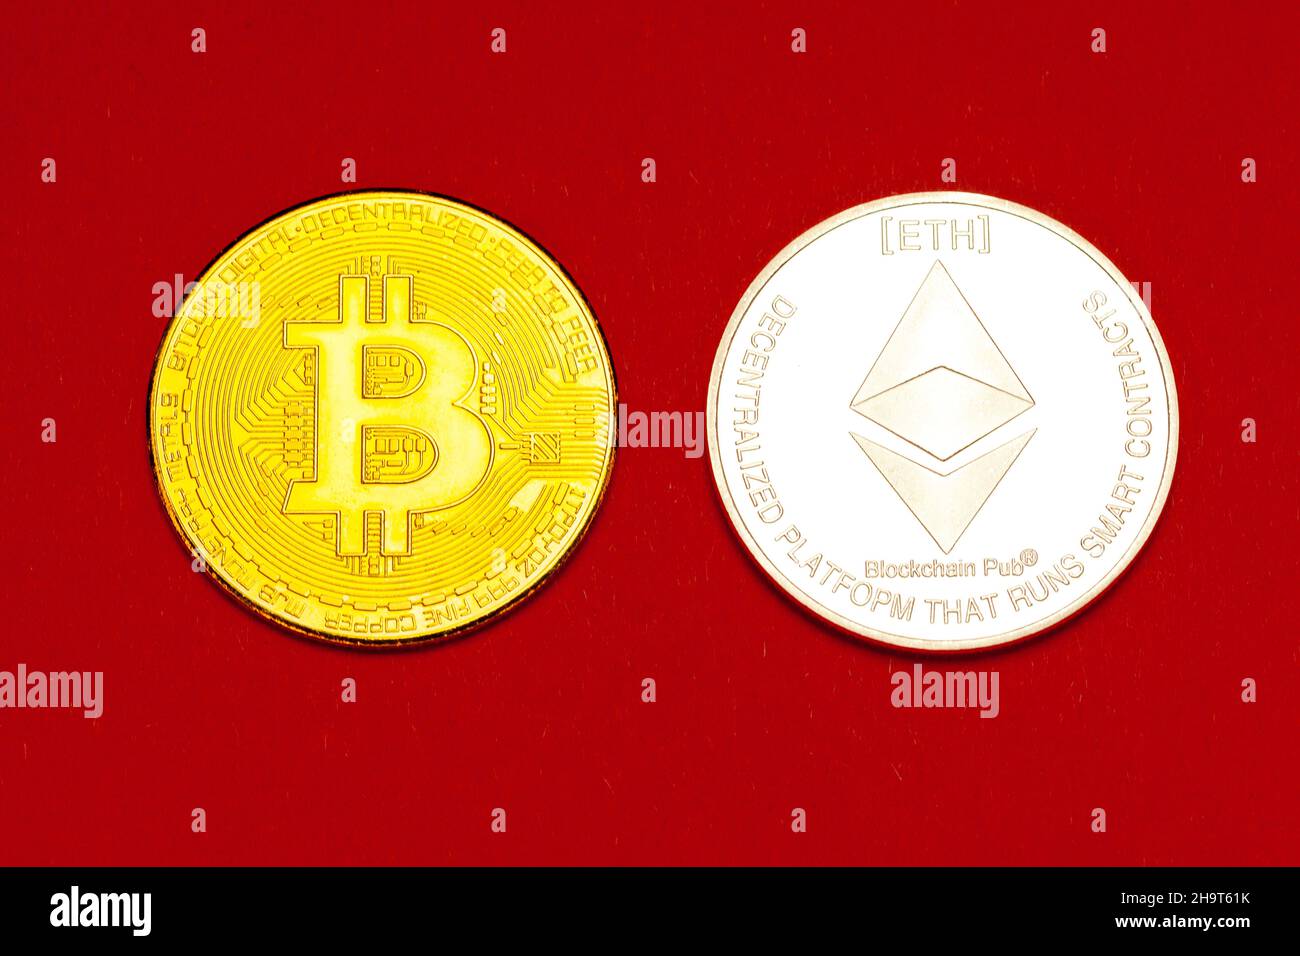 Bitcoin and Ethereum crytocurrencey coins. Stock Photo